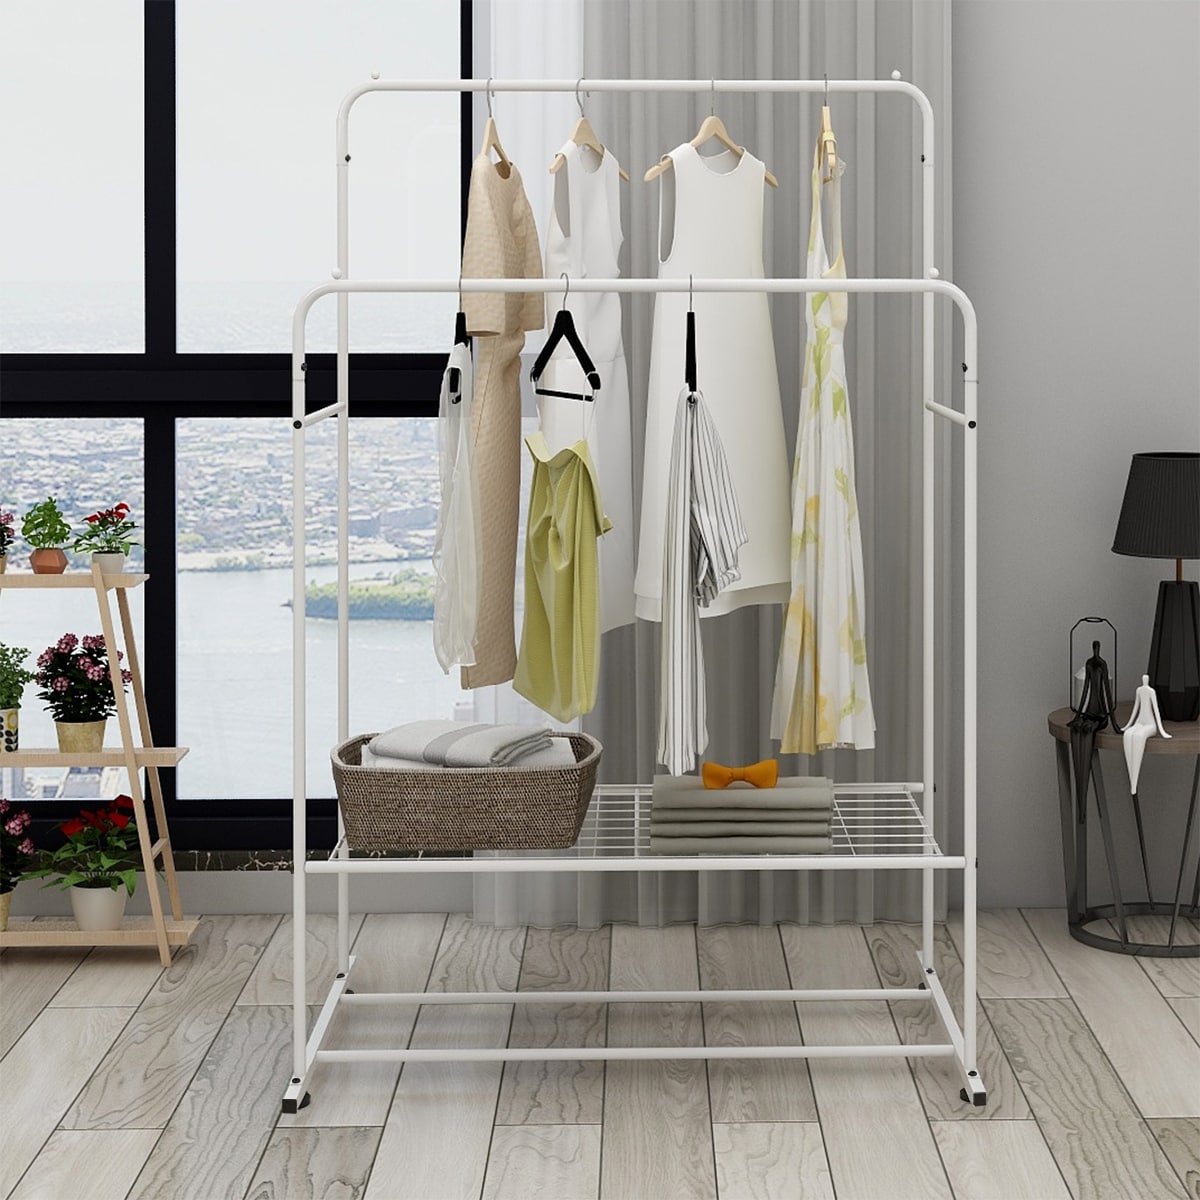 Heavy Duty Clothes Rack,Wire Garment Rack for Hanging  Clothes,Multi-Functional Bedroom Clothing Rack with 5 Hanger Rod,7  Shelves,2 Side Hooks,Extra